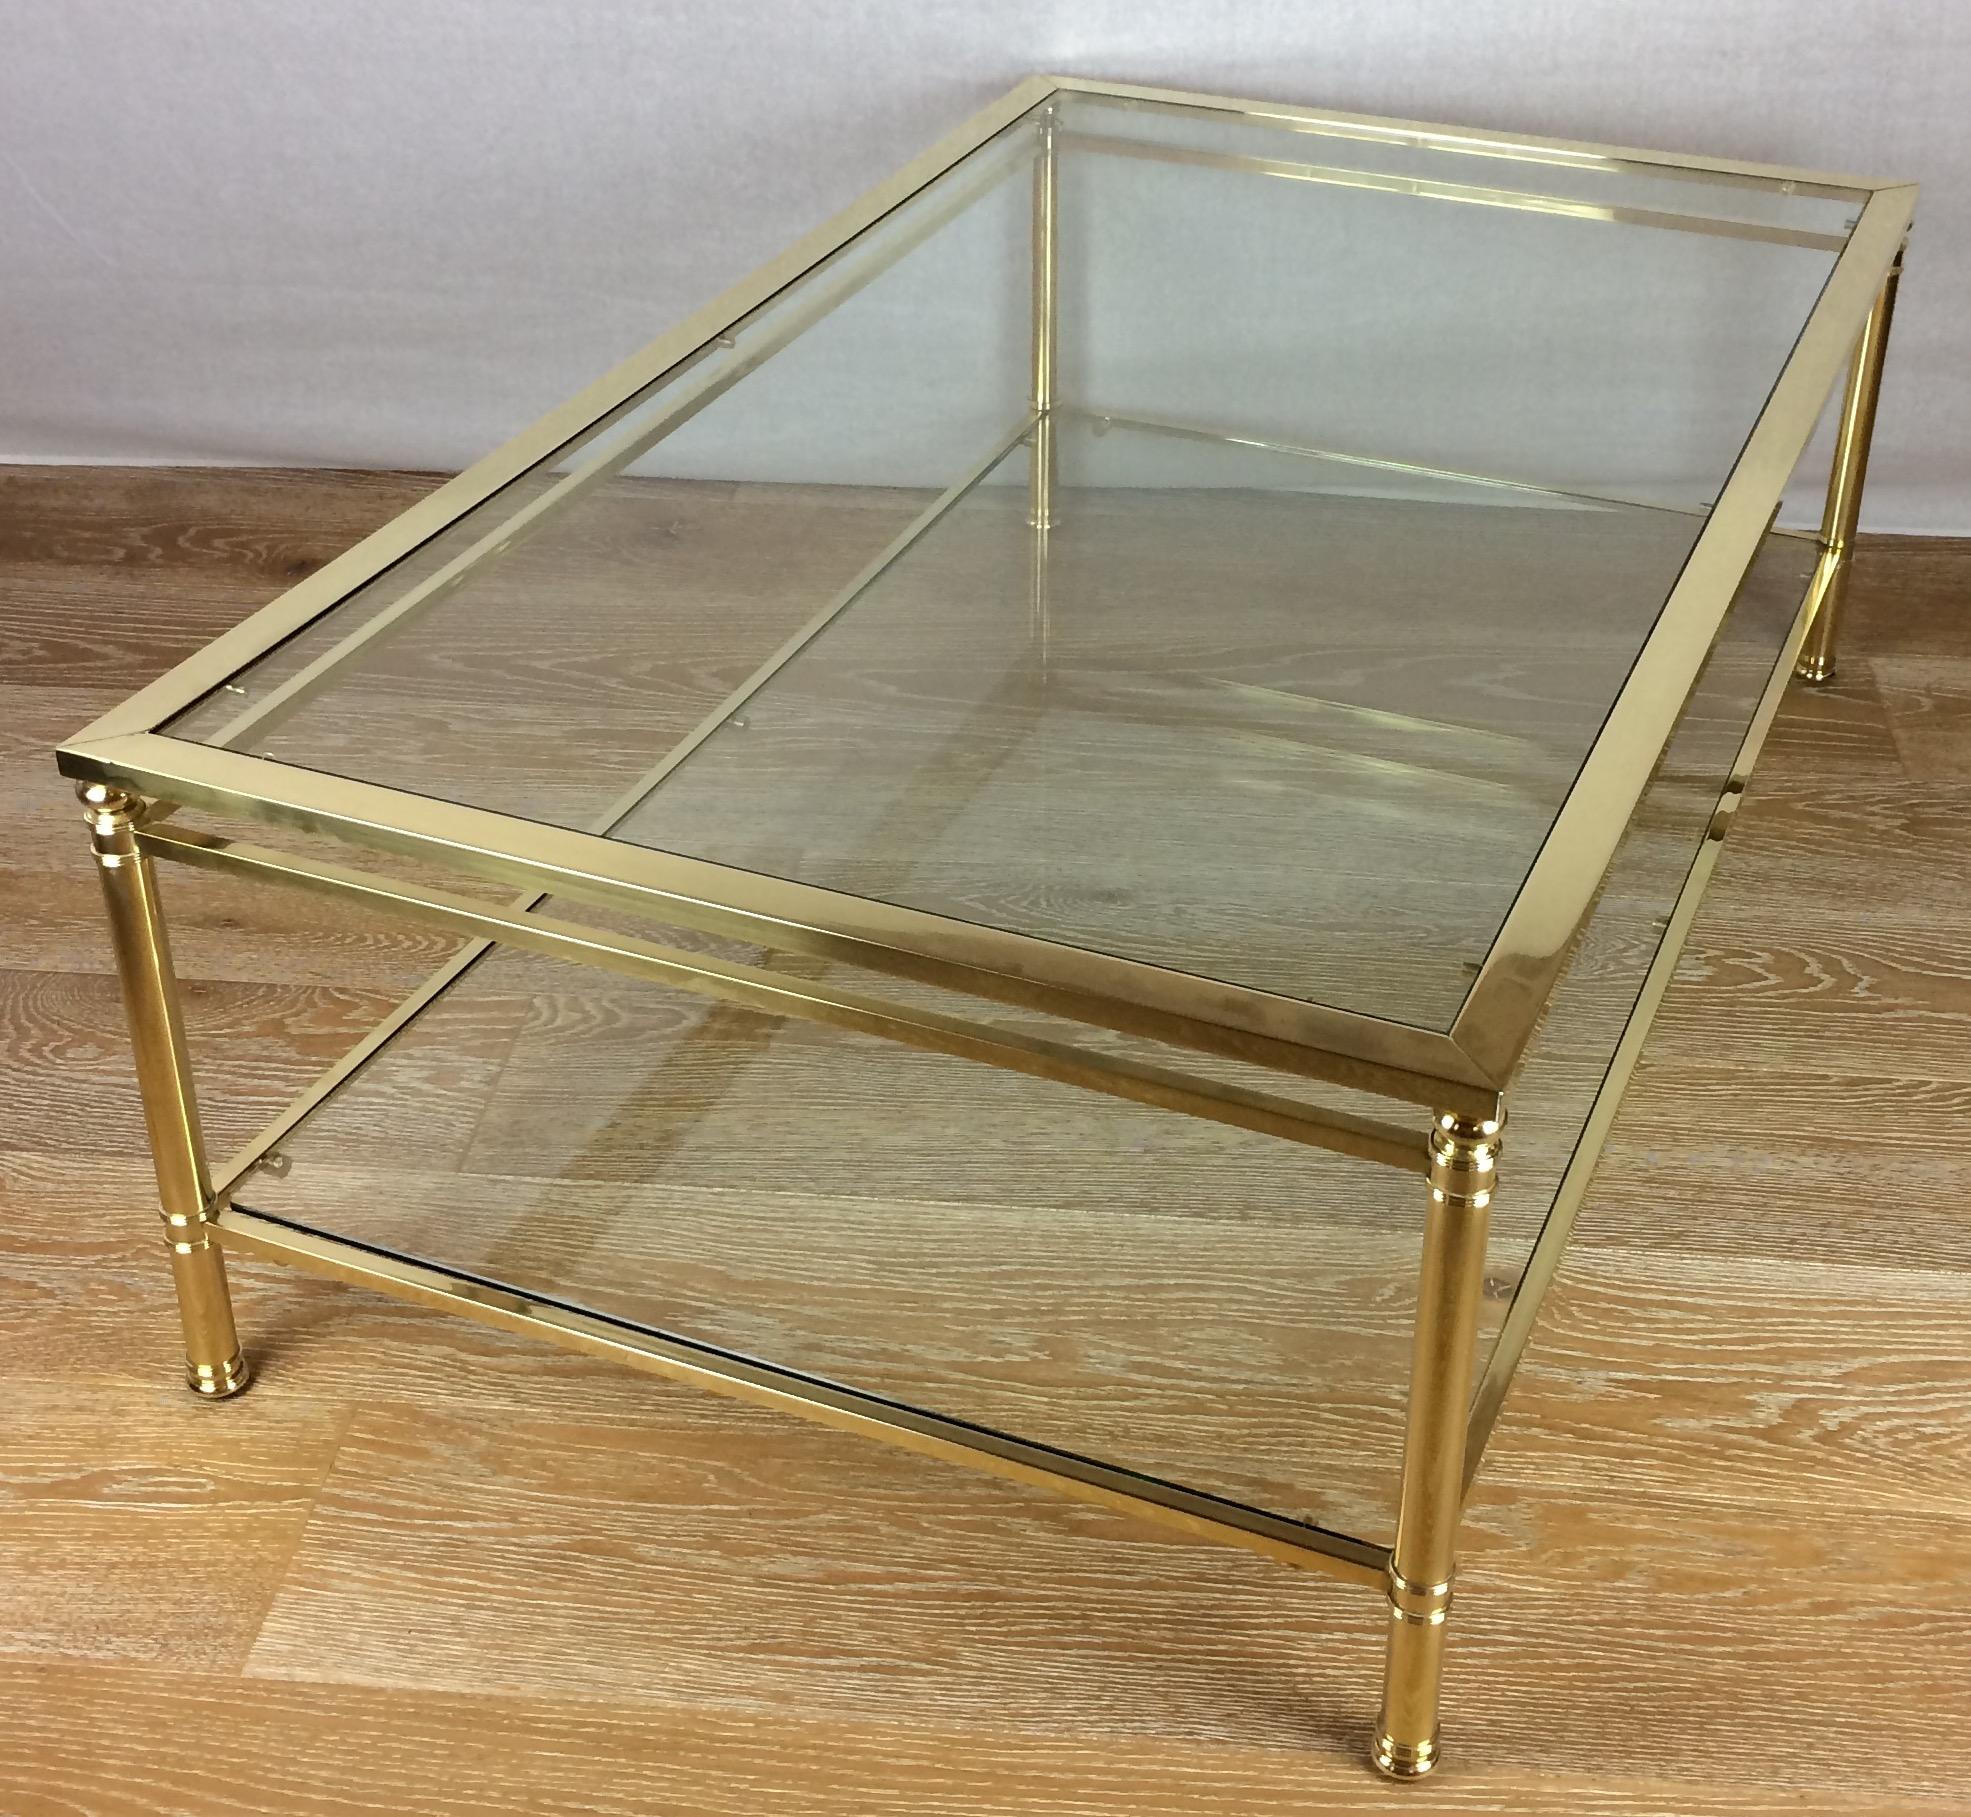 Elegant French Mid-Century Modern coffee or cocktail table in solid brass attributed to Maison Jansen.
Two-tiered, in perfect condition. 

    